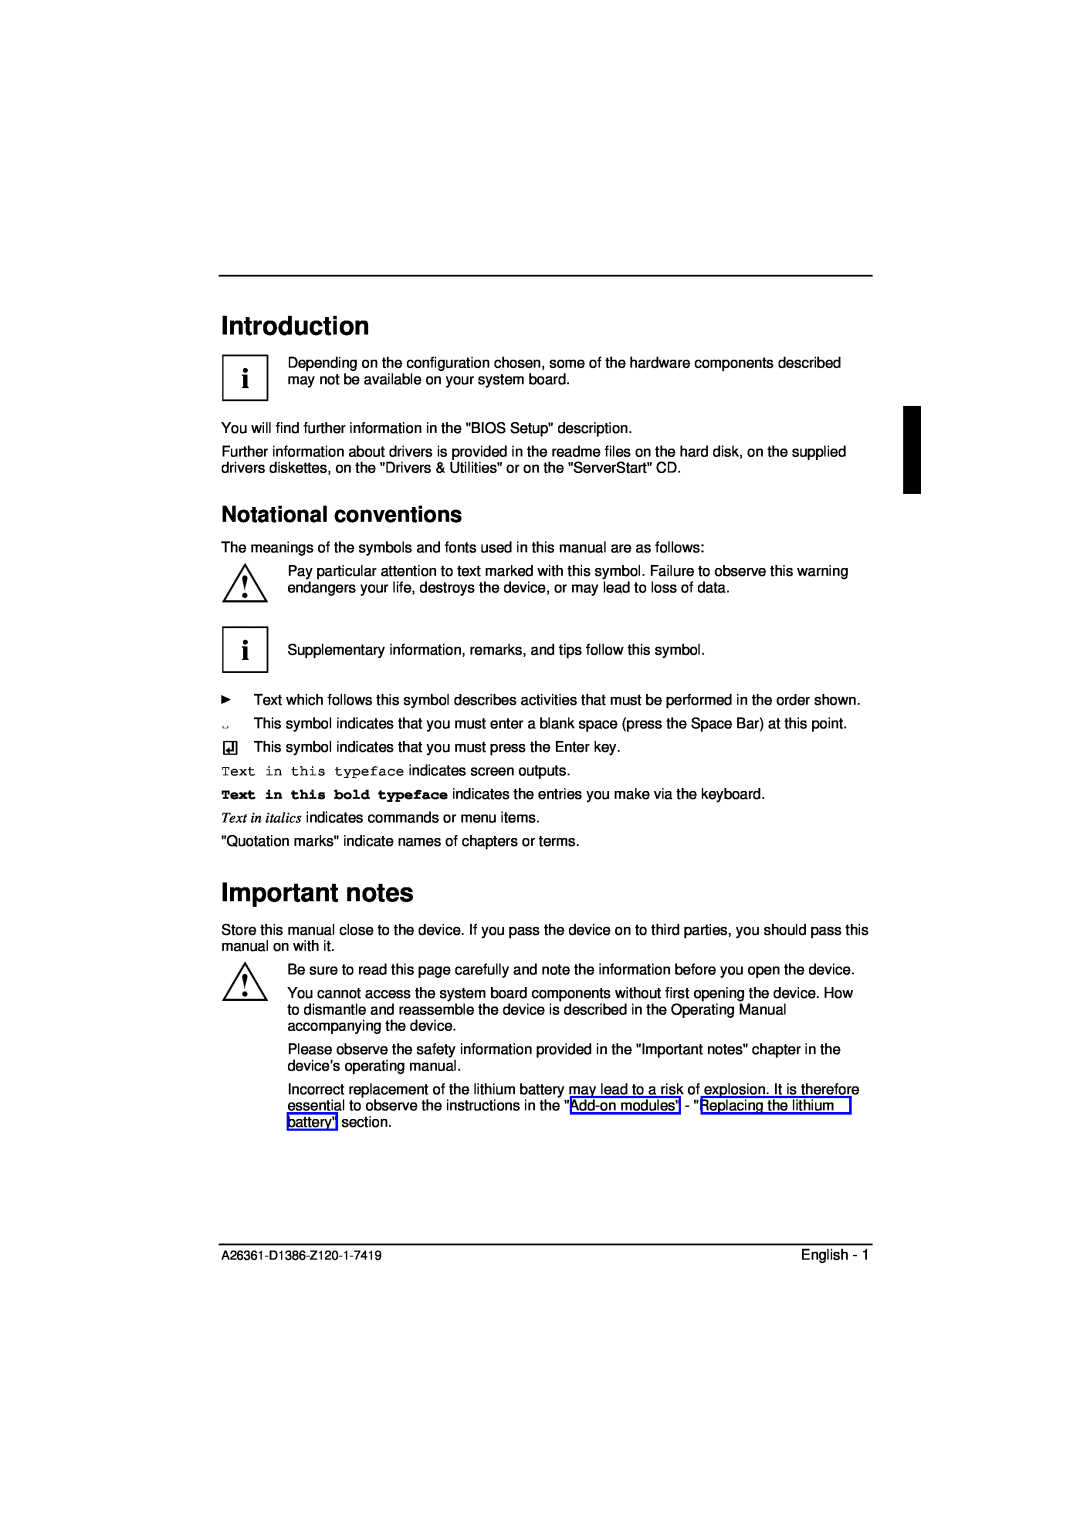 Fujitsu D1386 technical manual Introduction, Important notes, Notational conventions 